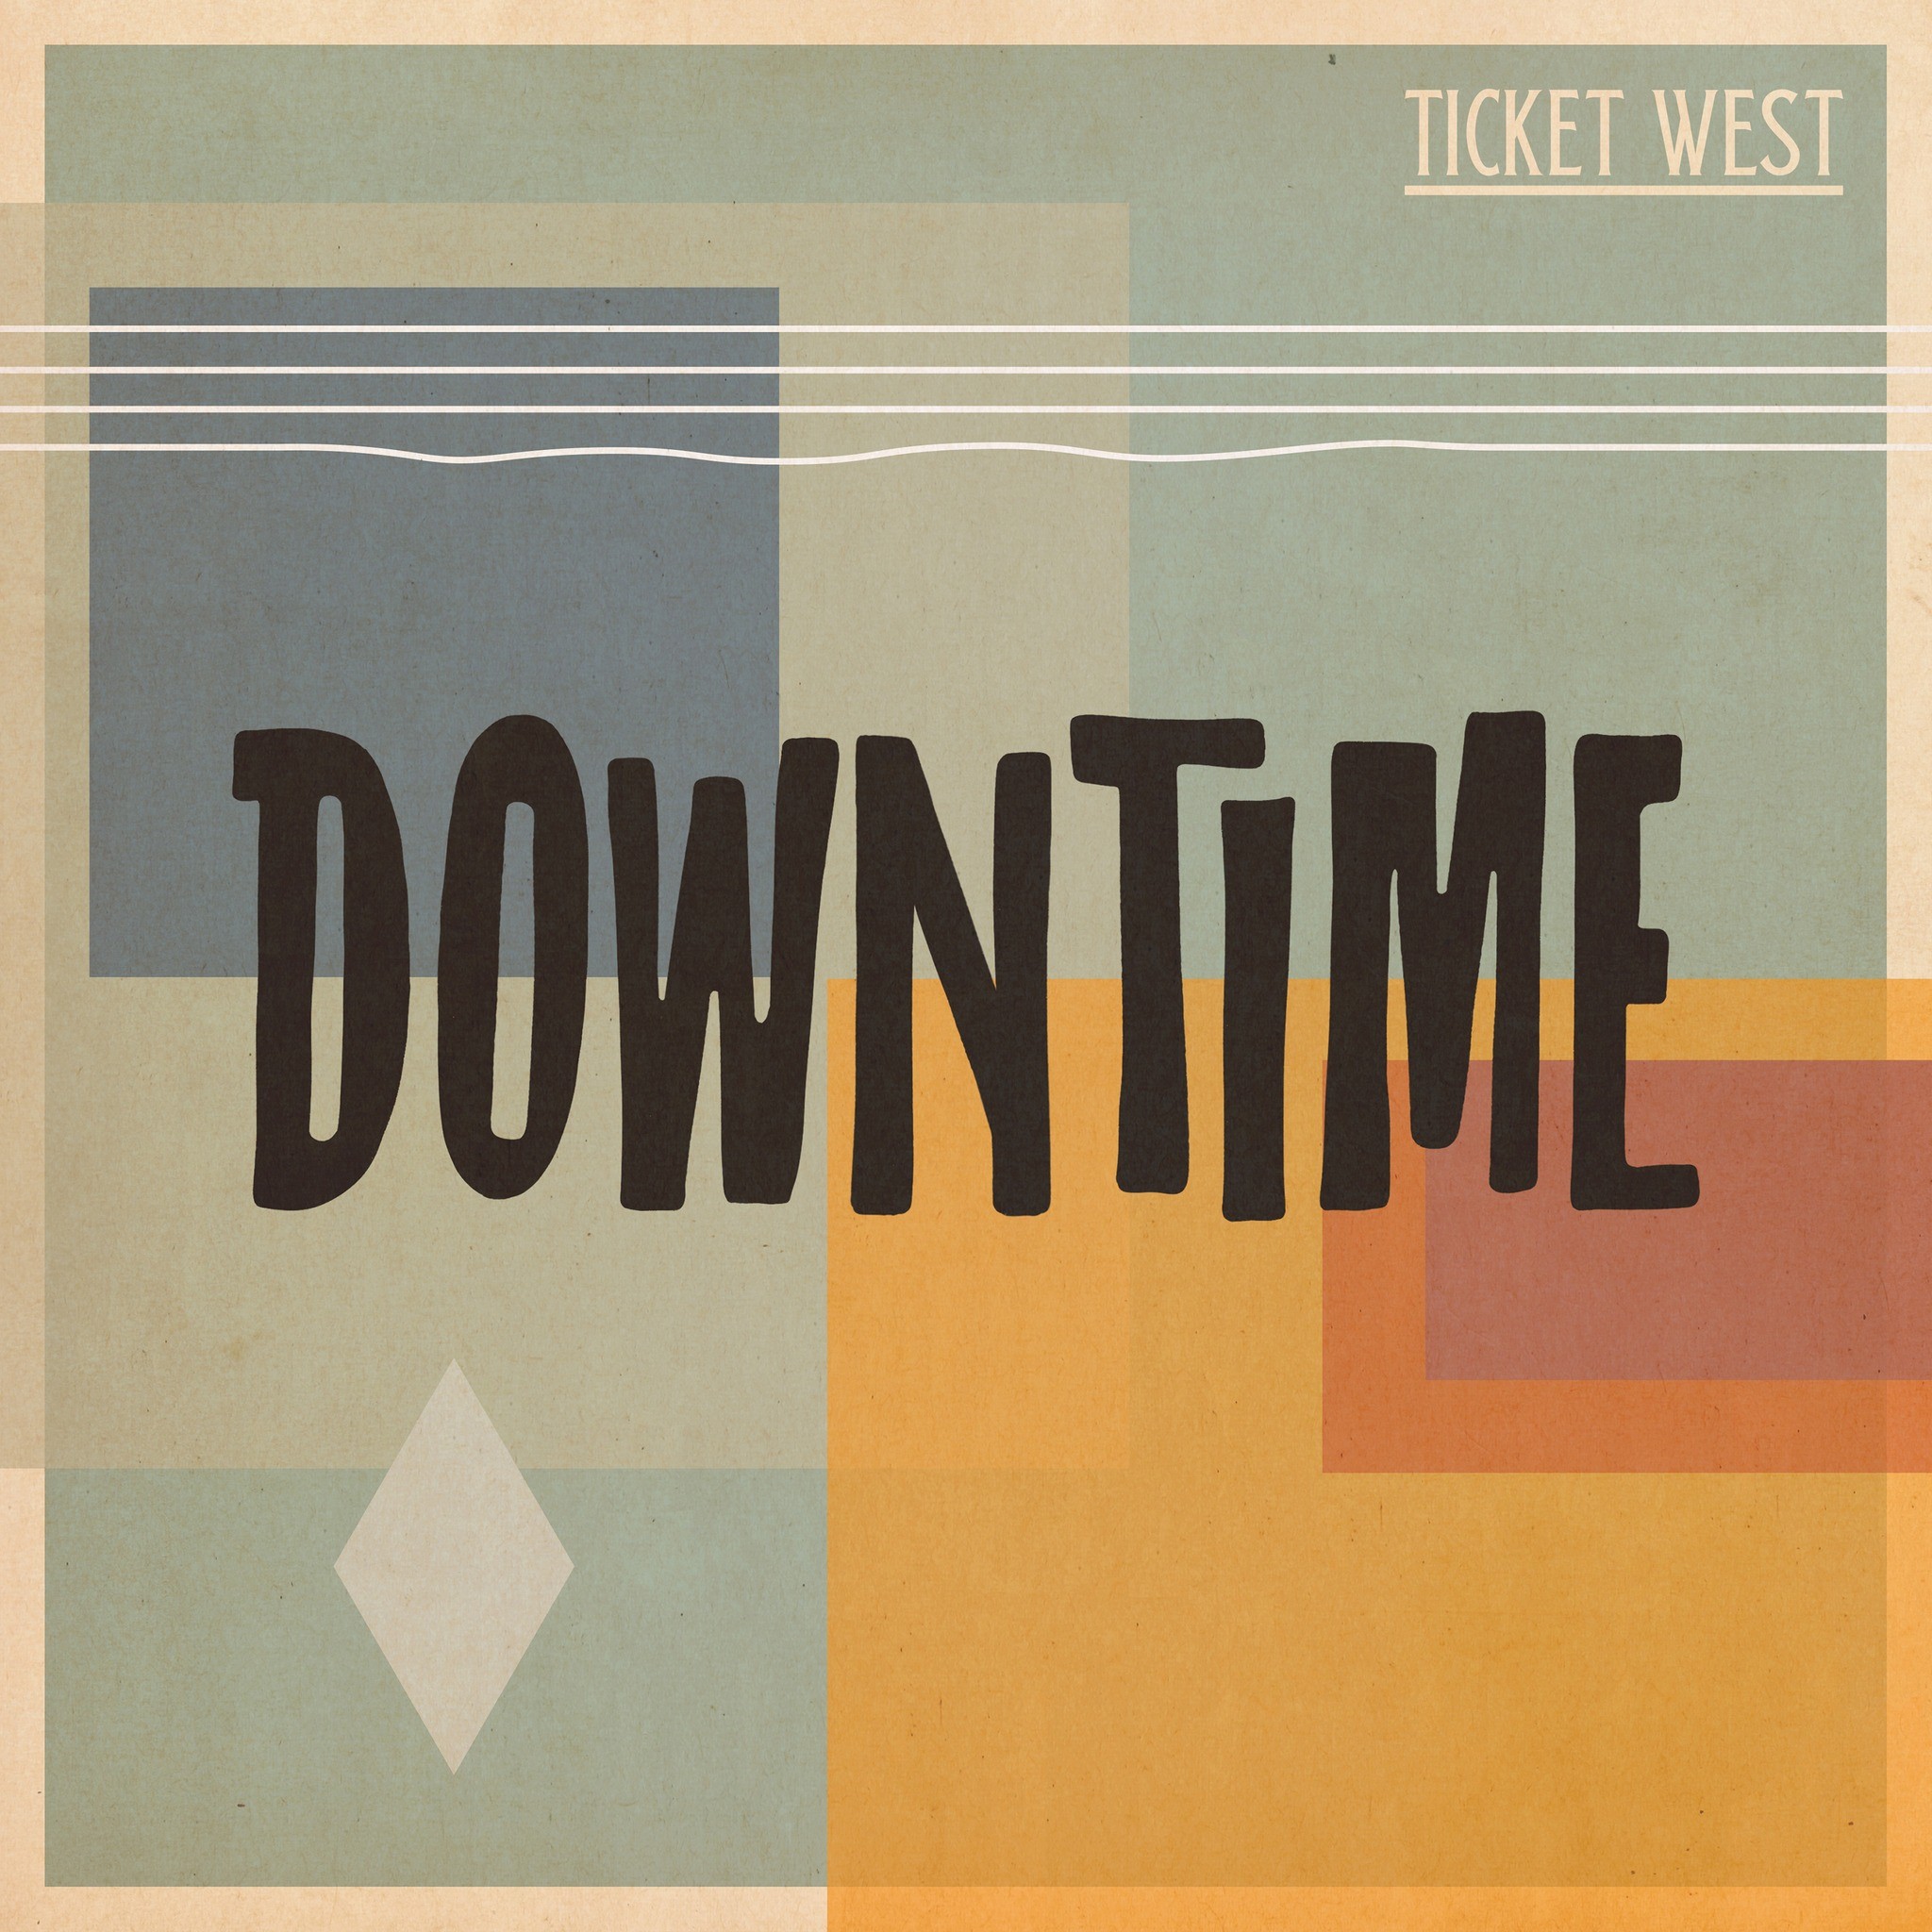 Ticket West - Downtime